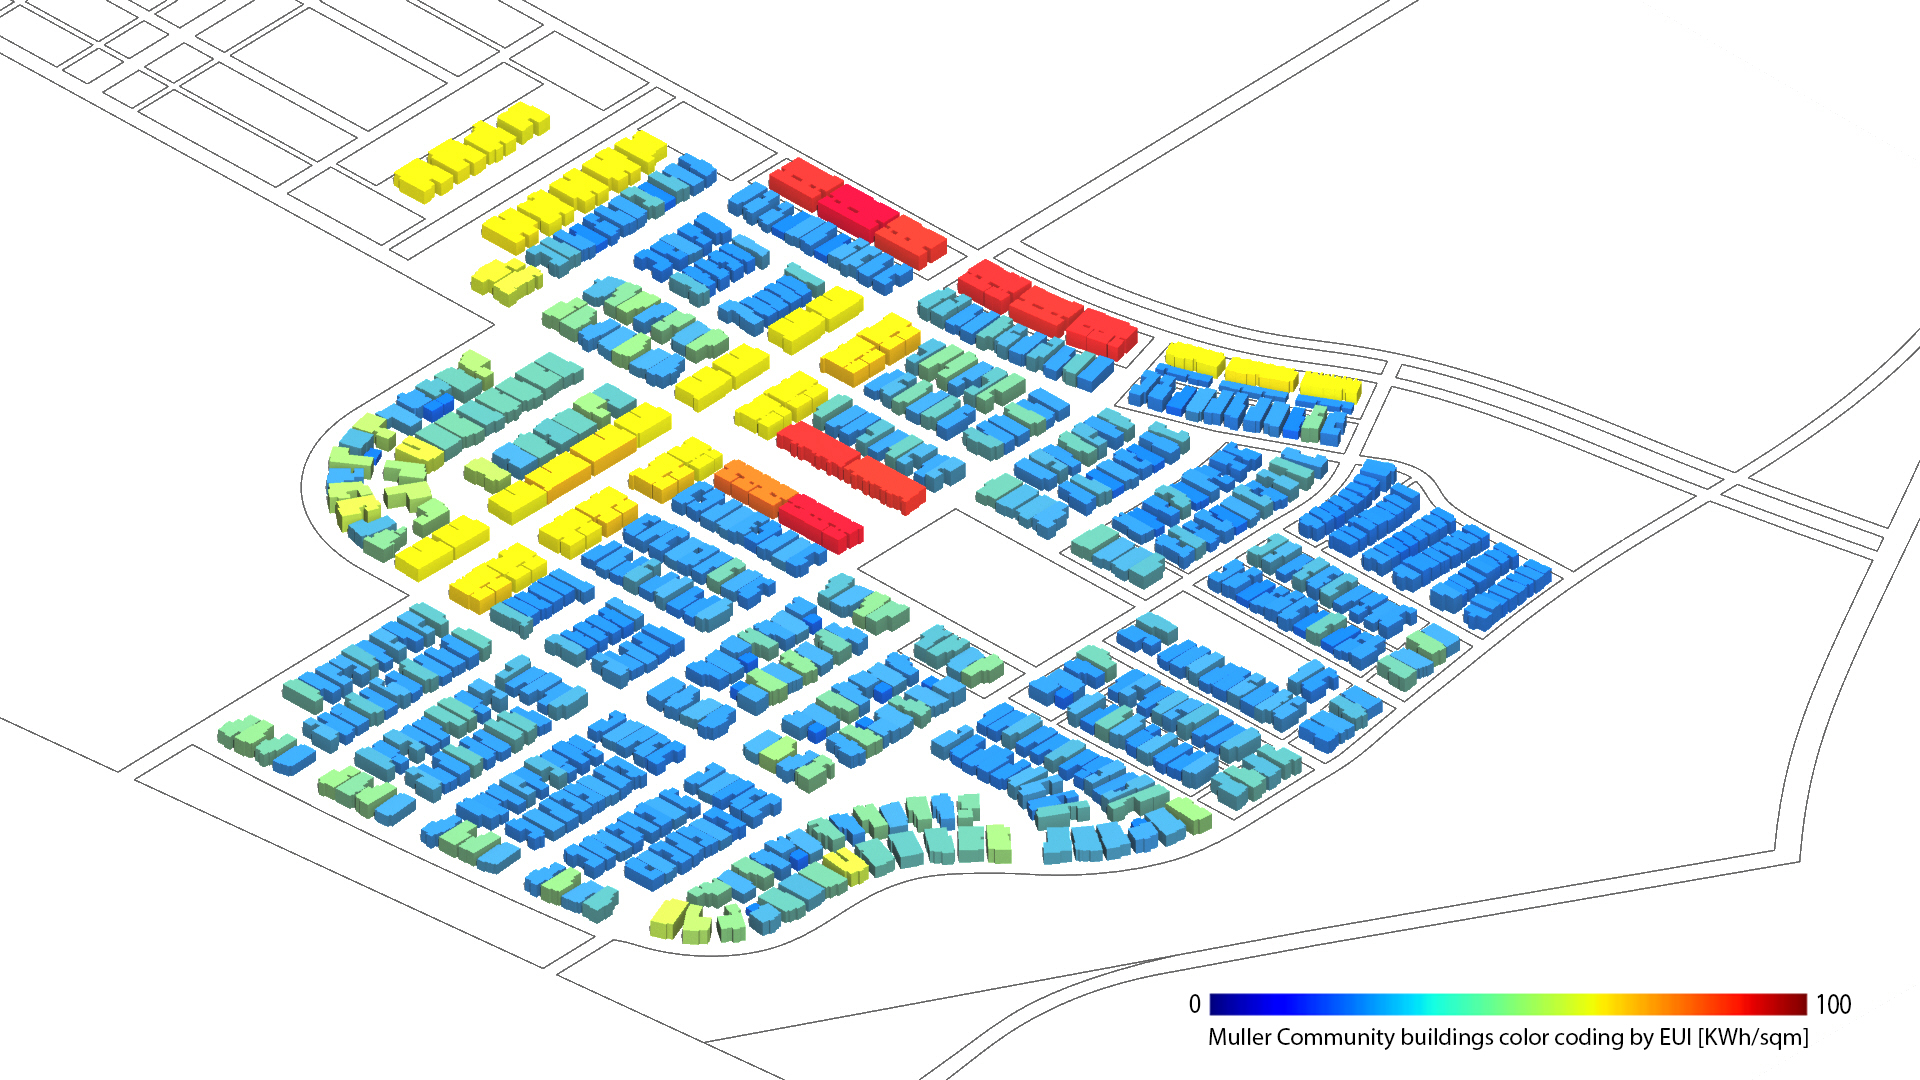 Urban building energy modeling with buildings rendered in different colors